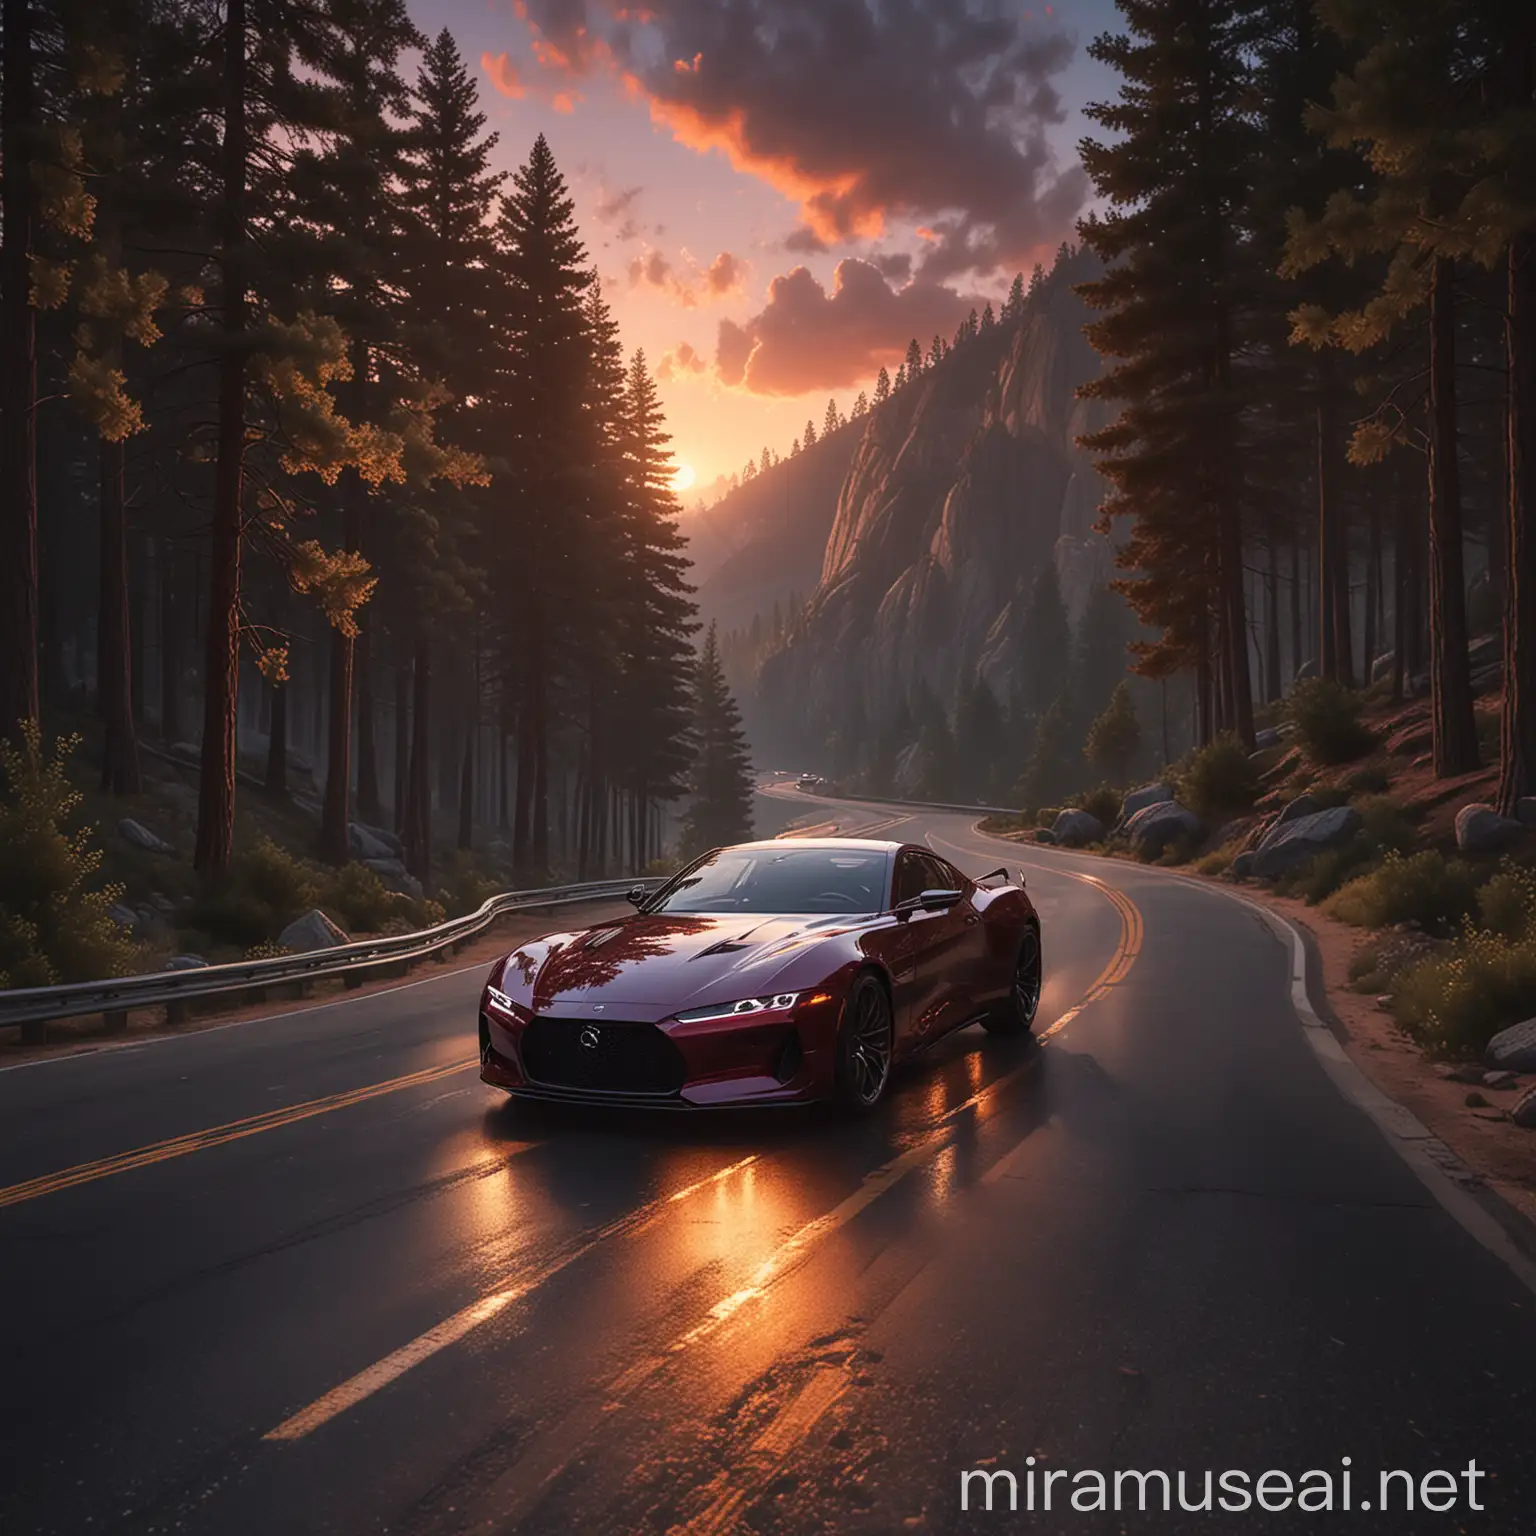 Create an AI-generated artwork featuring a sleek, modern sports car speeding down a winding mountain road at dusk. The car's headlights pierce the encroaching twilight, casting beams of light on the asphalt and illuminating the curves ahead. The surrounding mountains loom majestically, their silhouettes dark against the vibrant colors of the setting sun. The sky above transitions from deep oranges and reds to the first hints of nightfall, with stars beginning to twinkle faintly. In the foreground, tall pine trees line the road, their branches swaying gently in the cool evening breeze. The scene should capture the thrill of the drive, the power and elegance of the car, and the serene beauty of the natural landscape as day turns to night.